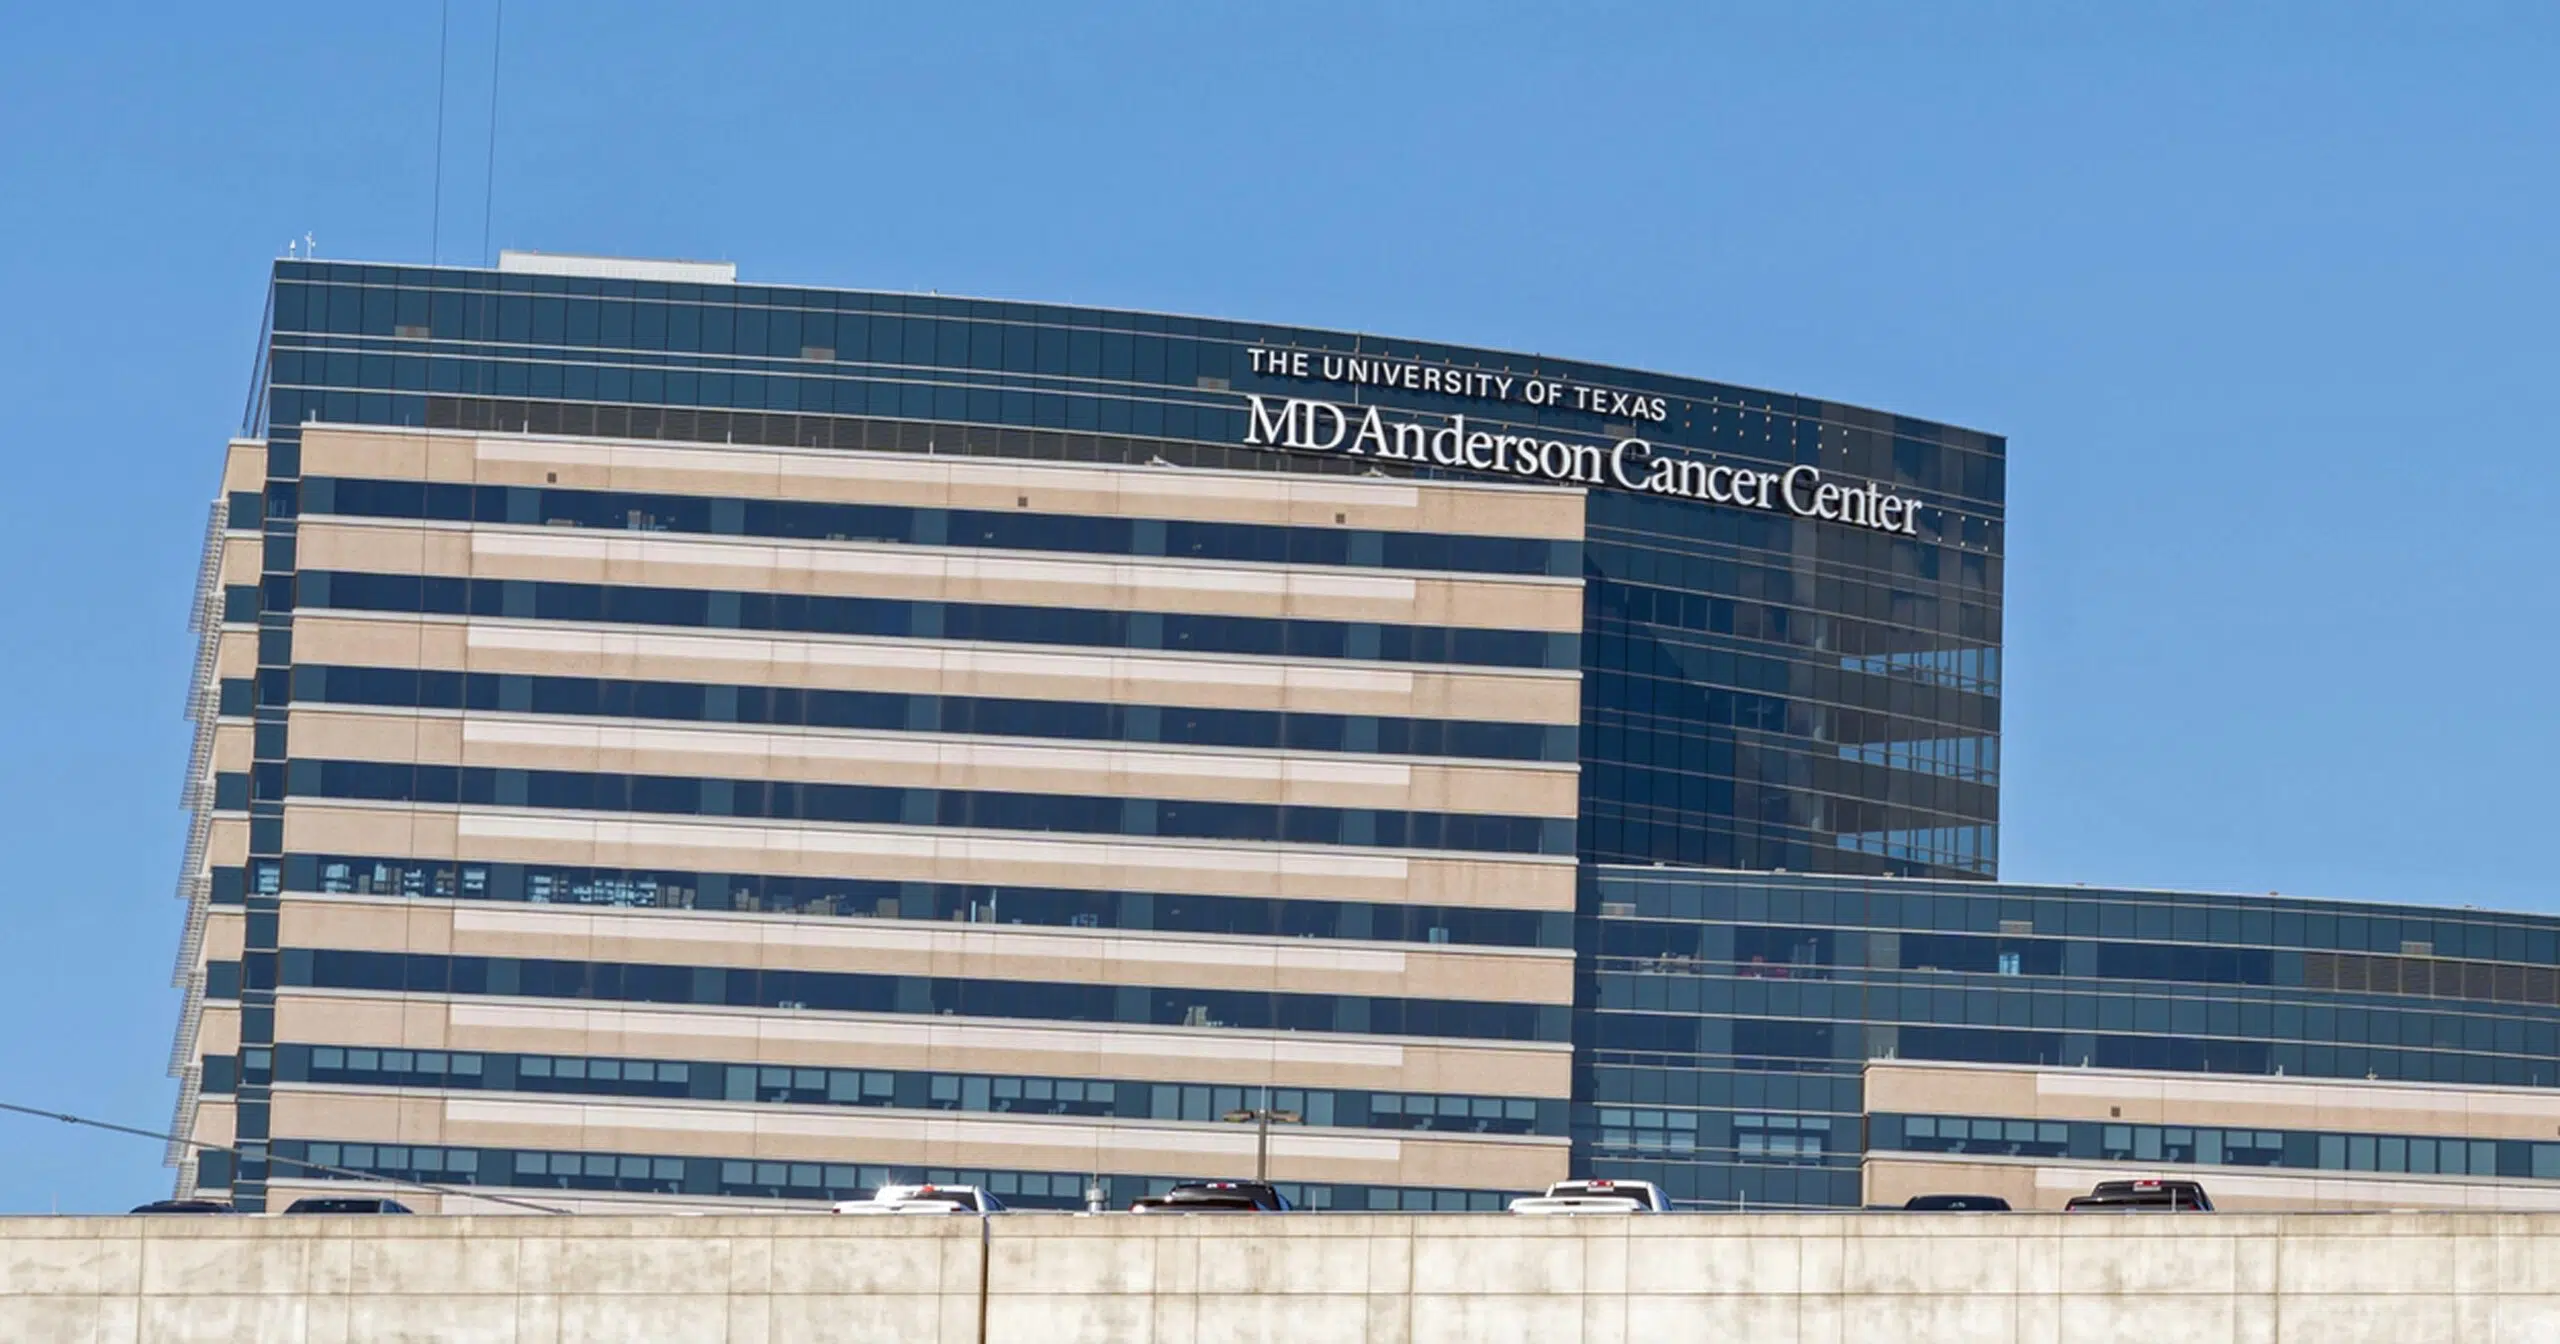 The University of Texas MD Anderson Cancer Center in Houston, Texas,